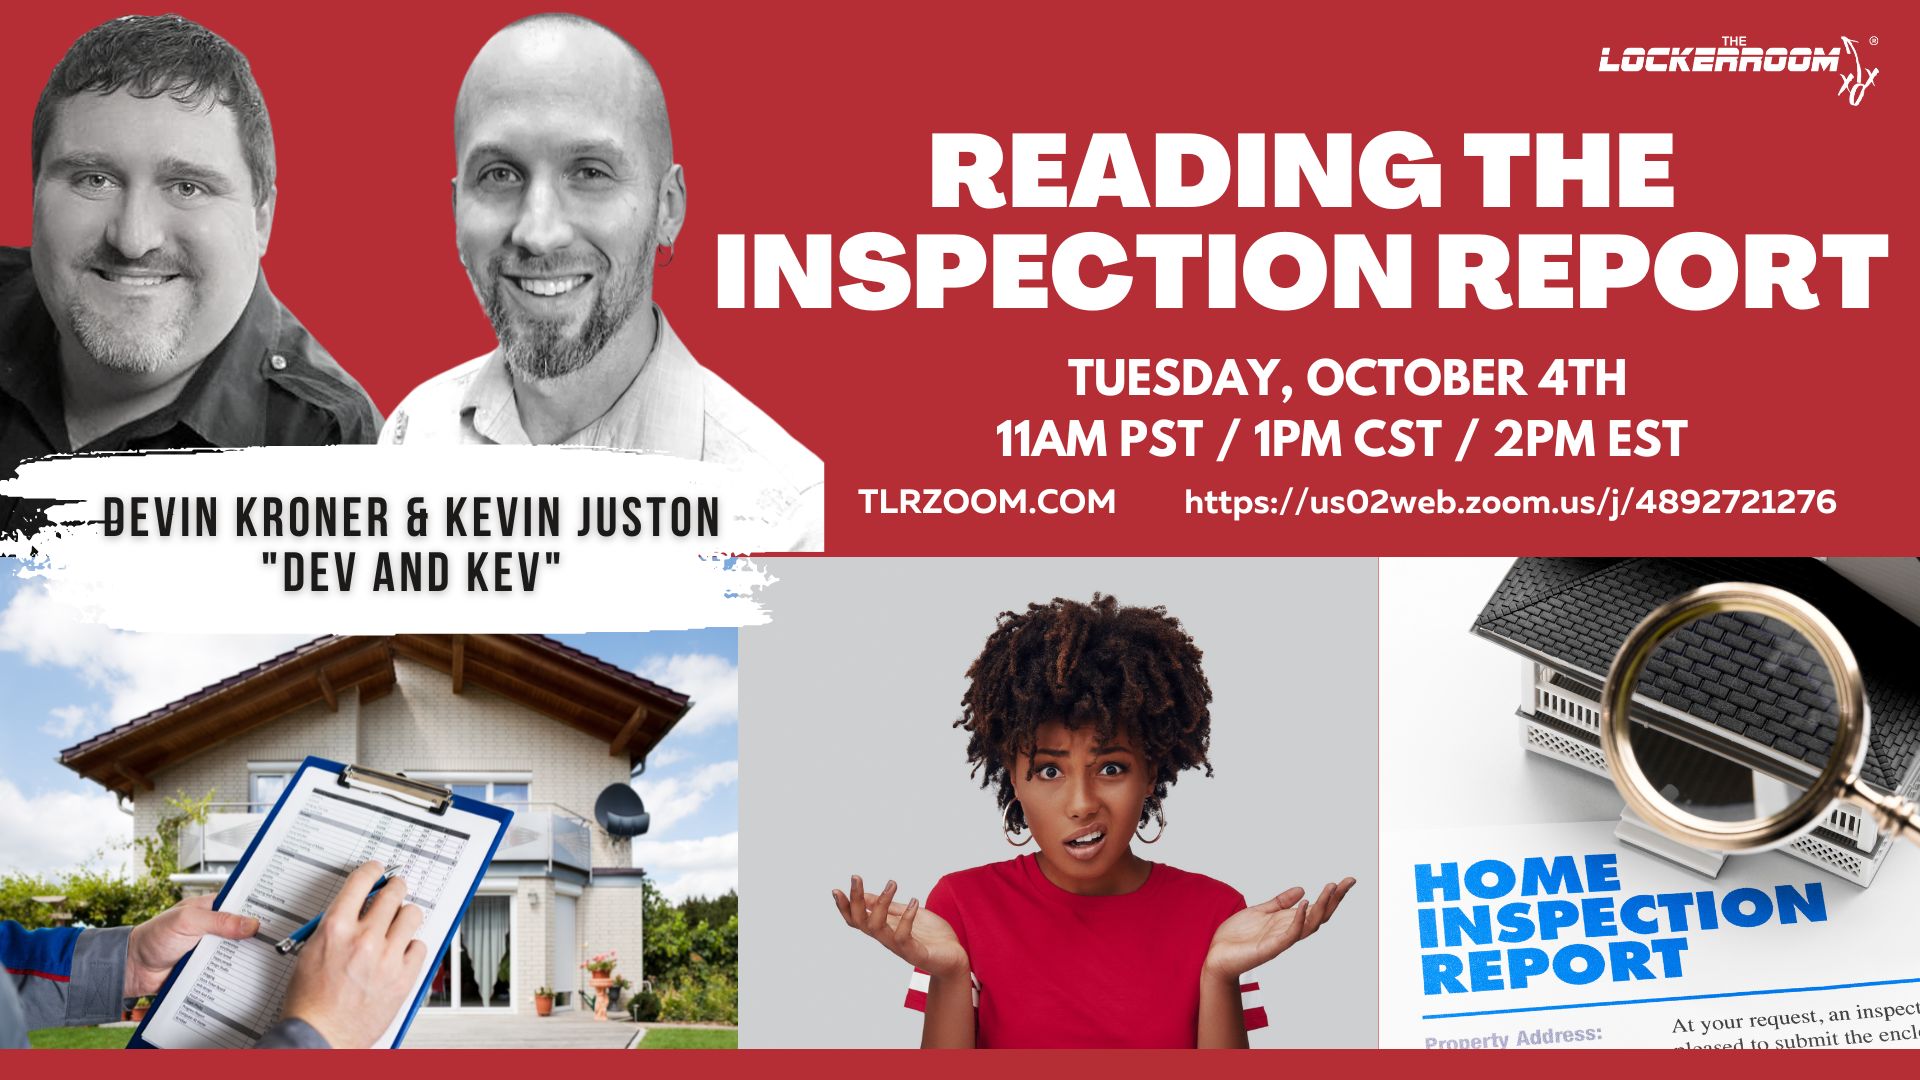 
TLR: READING THE INSPECTION REPORT